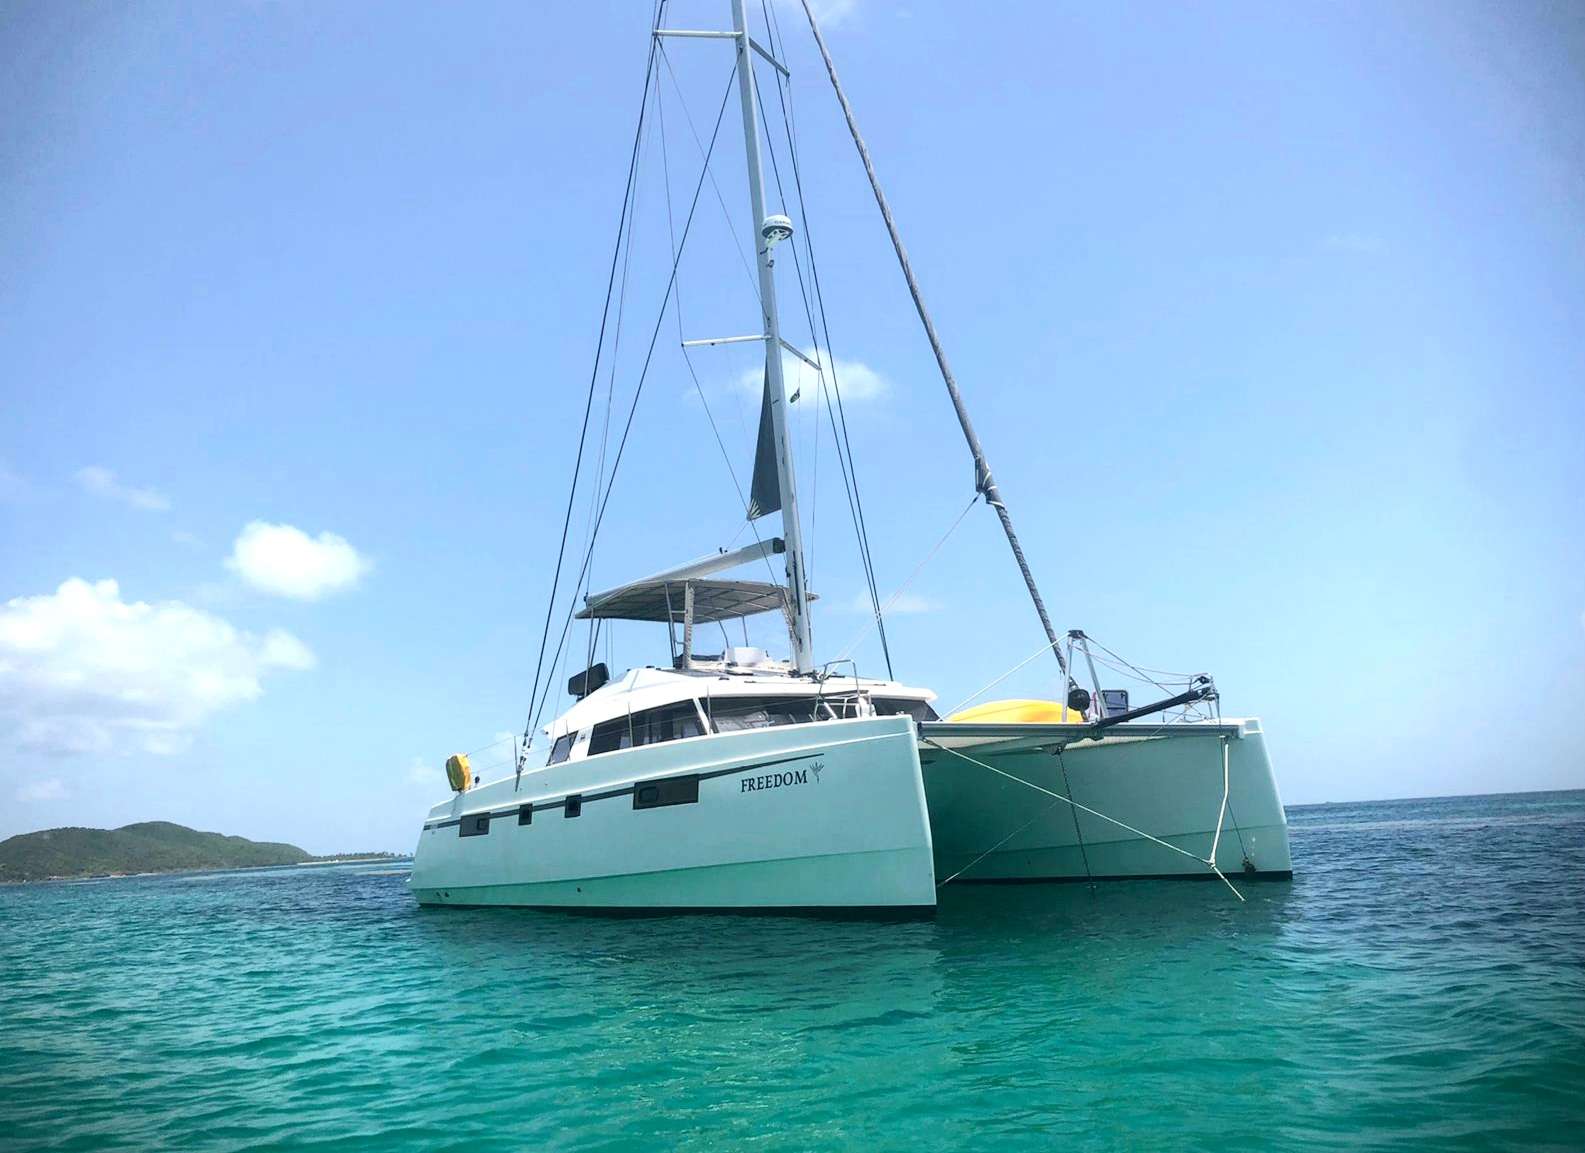 Freedom - Yacht Charter St Vincent & Boat hire in Caribbean 1